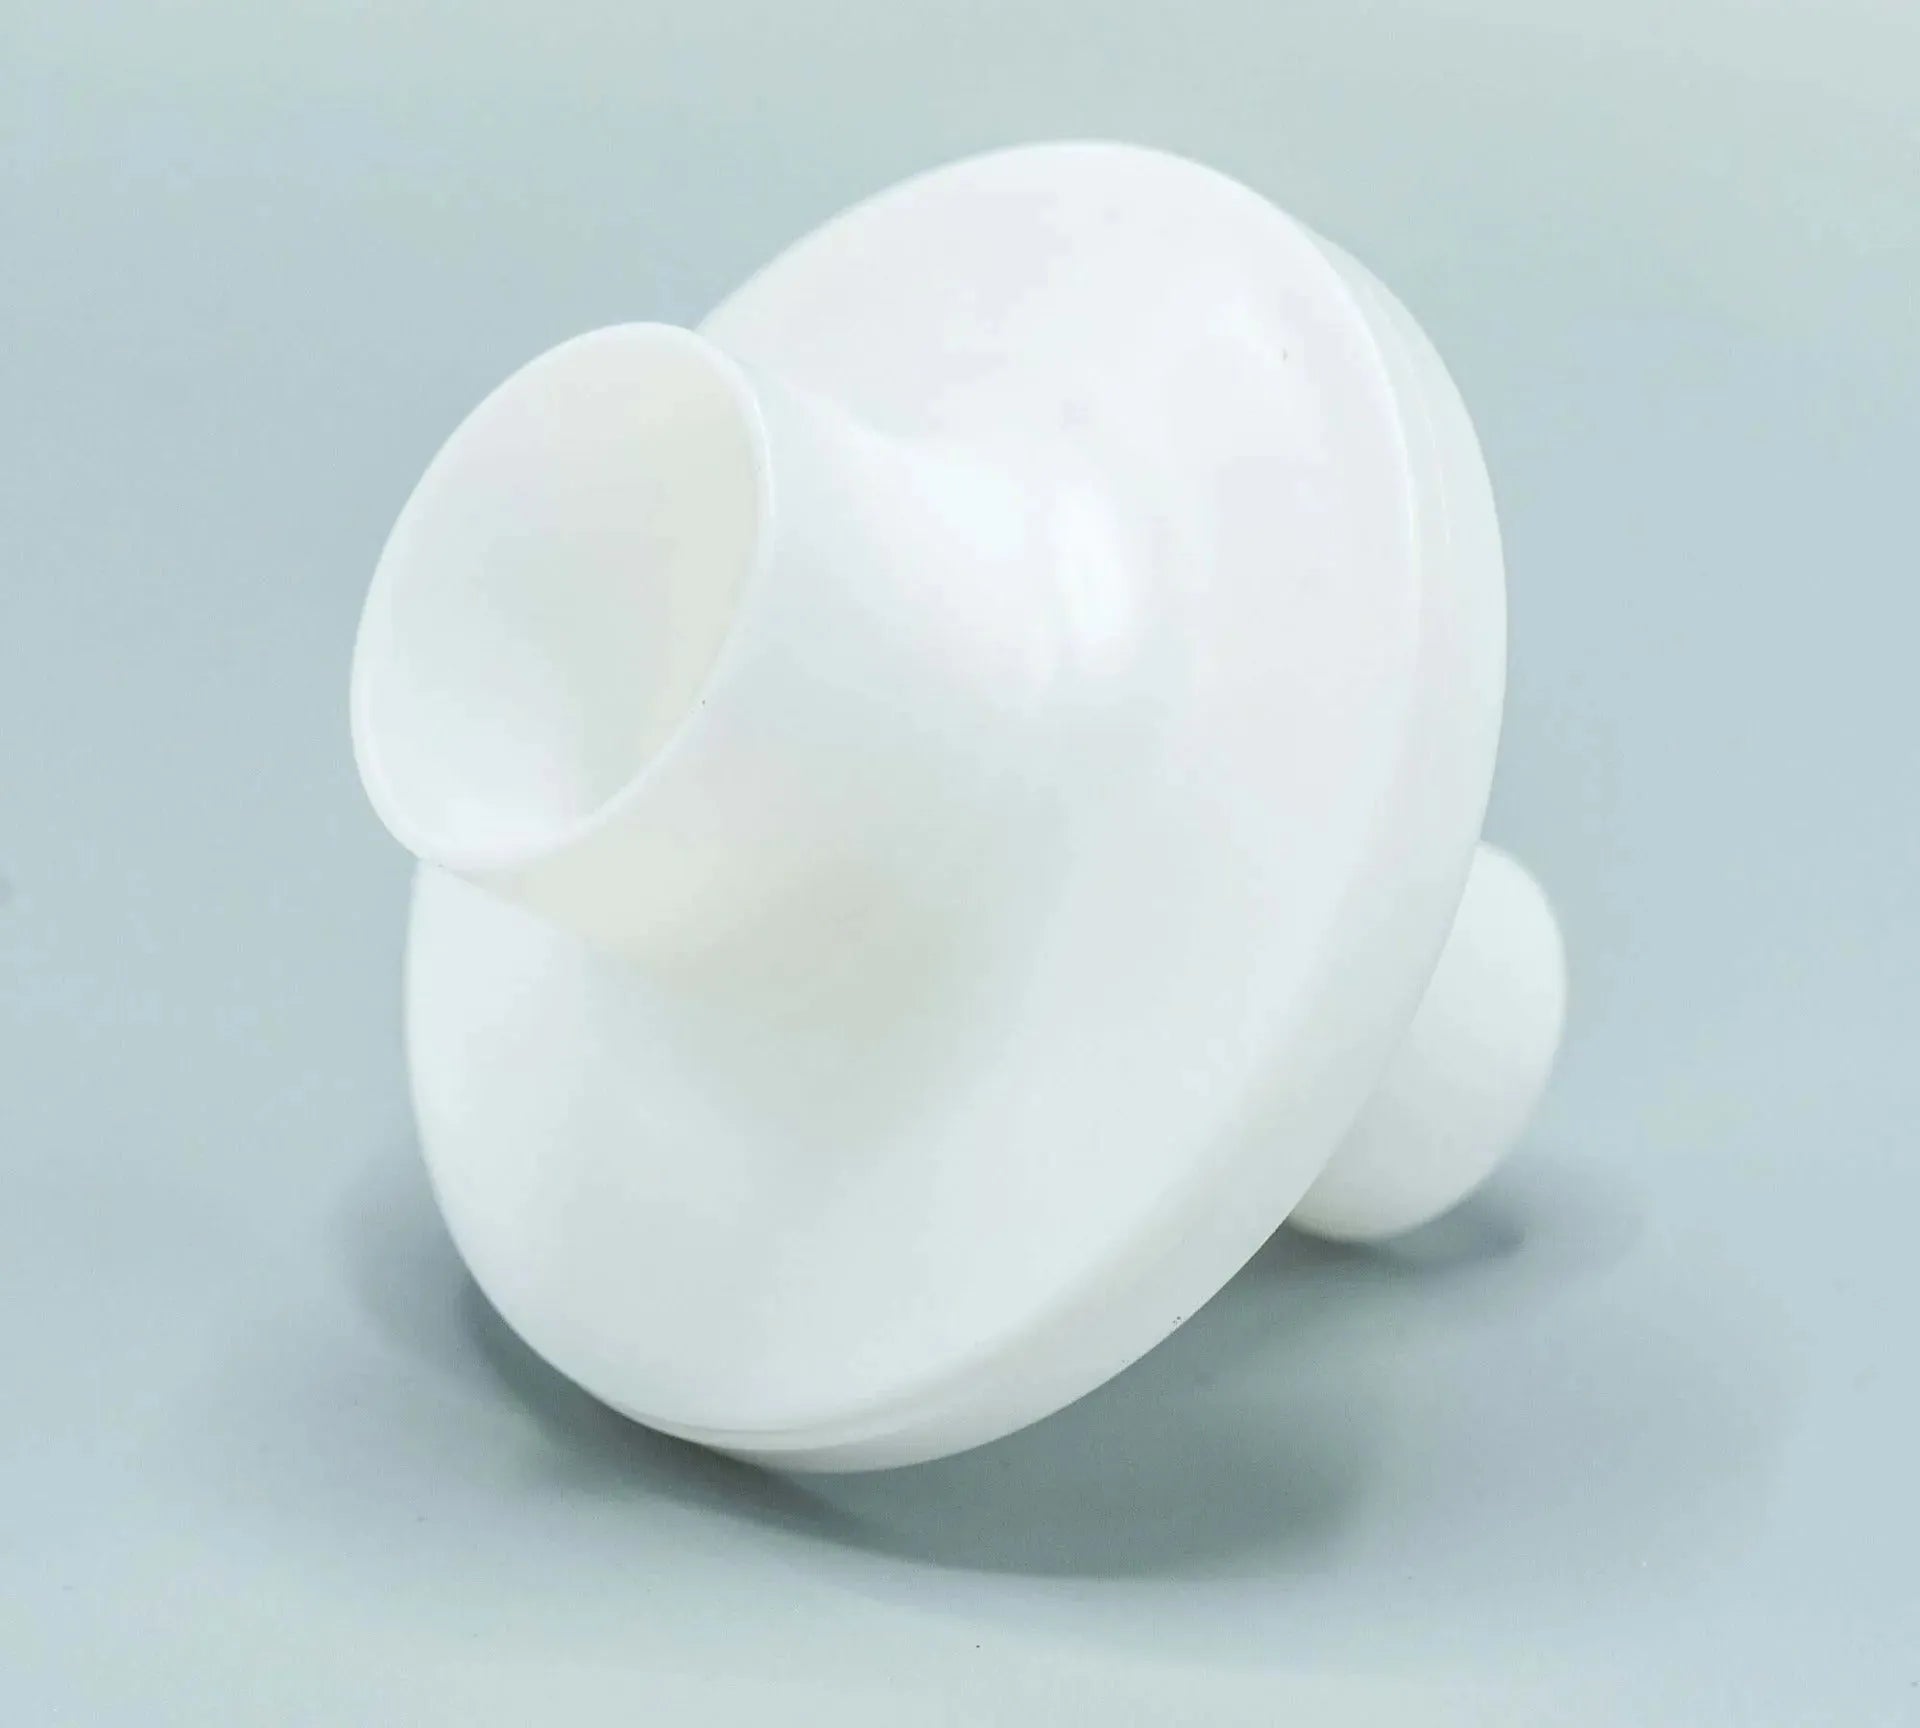 The bacterial/viral filter mouthpiece shown is round in shape, and white in color.